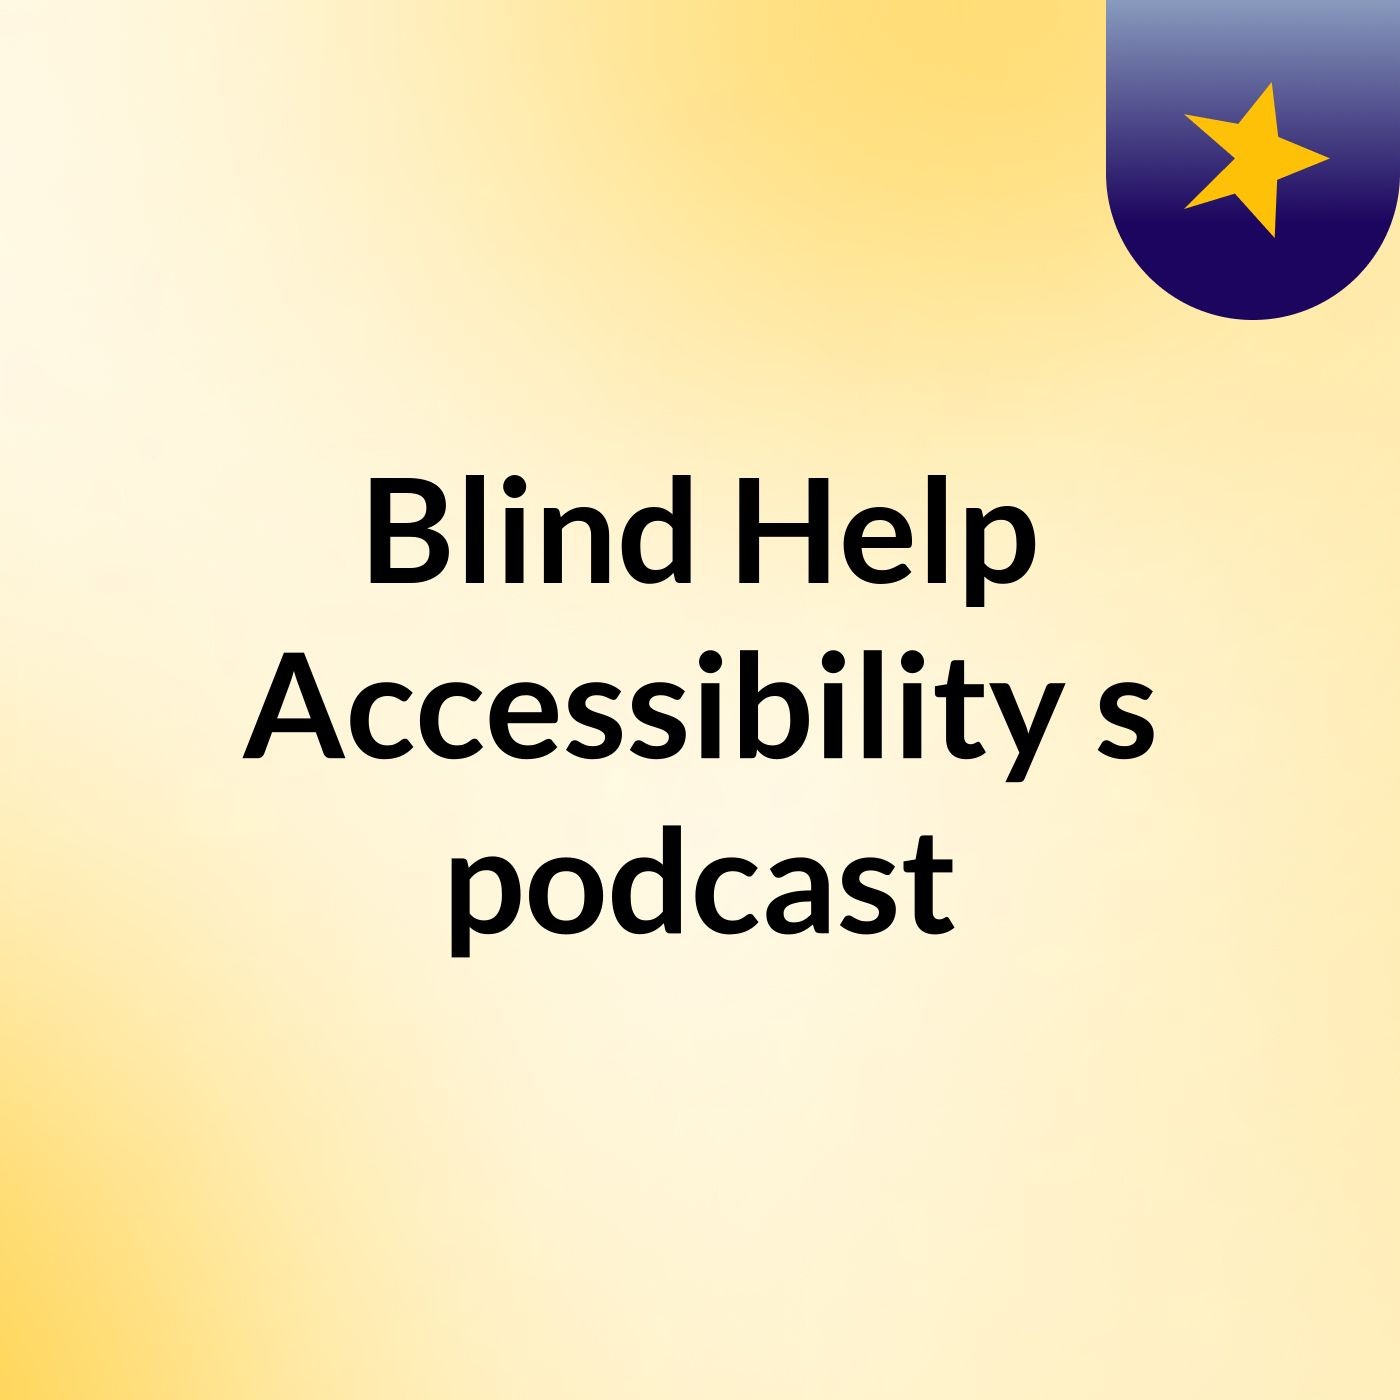 Blind Help Accessibility's podcast